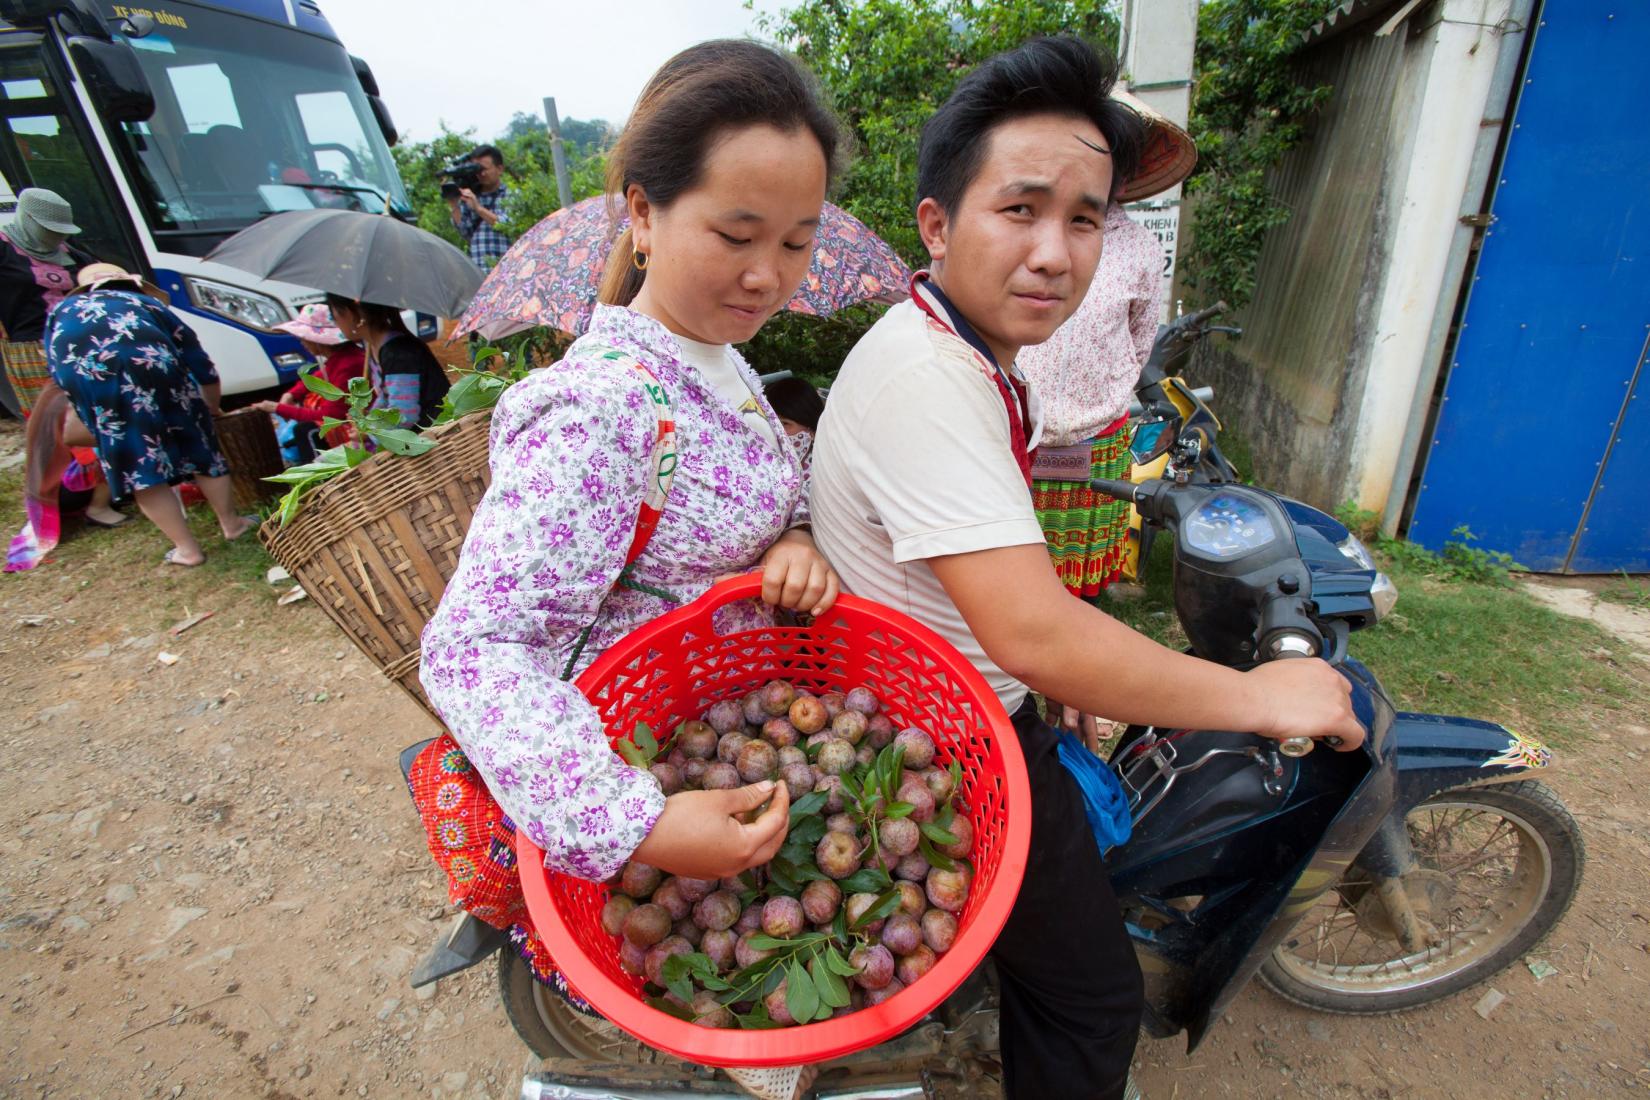 A man and woman sitting on a motorbike with a red basket of plums